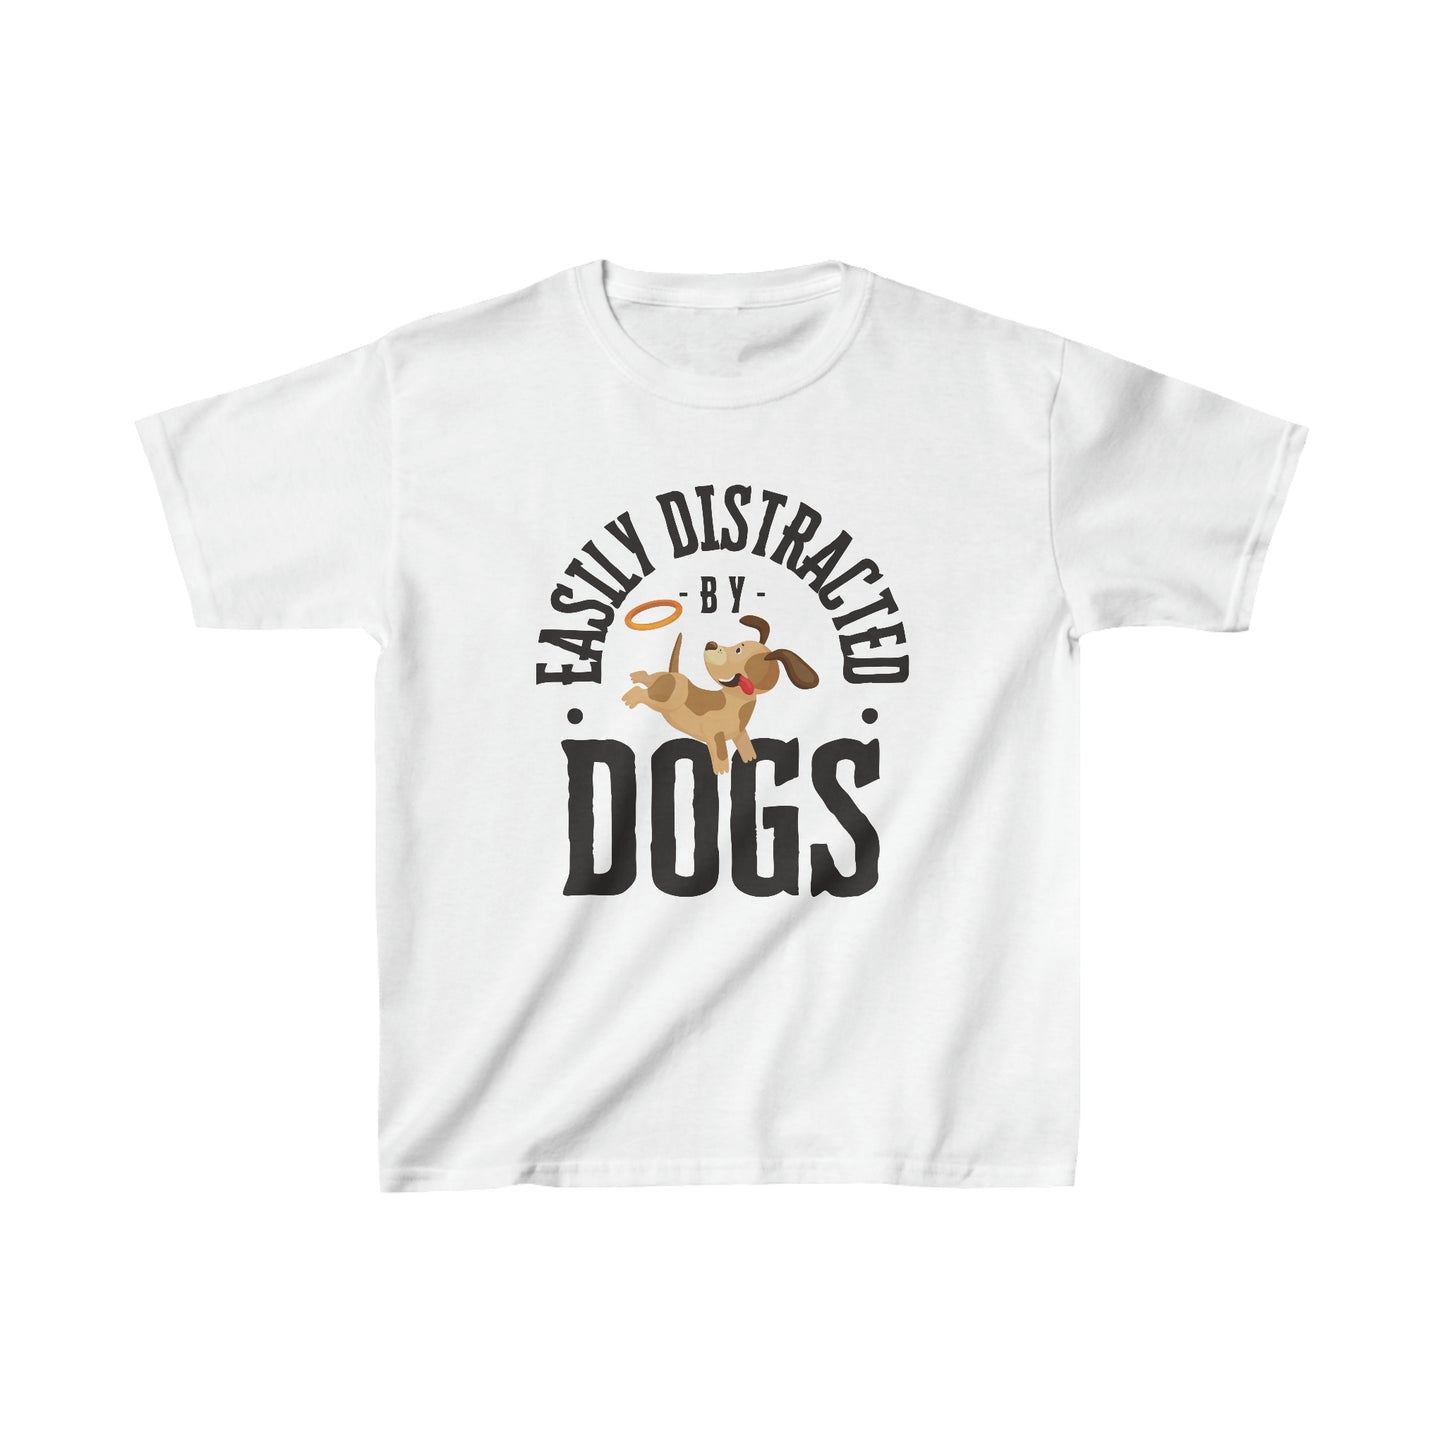 A Dogs Pure Love white unisex kids tee showcases a cartoon dog graphic alongside the slogan 'Easily Distracted by Dogs,' against a white canvas.